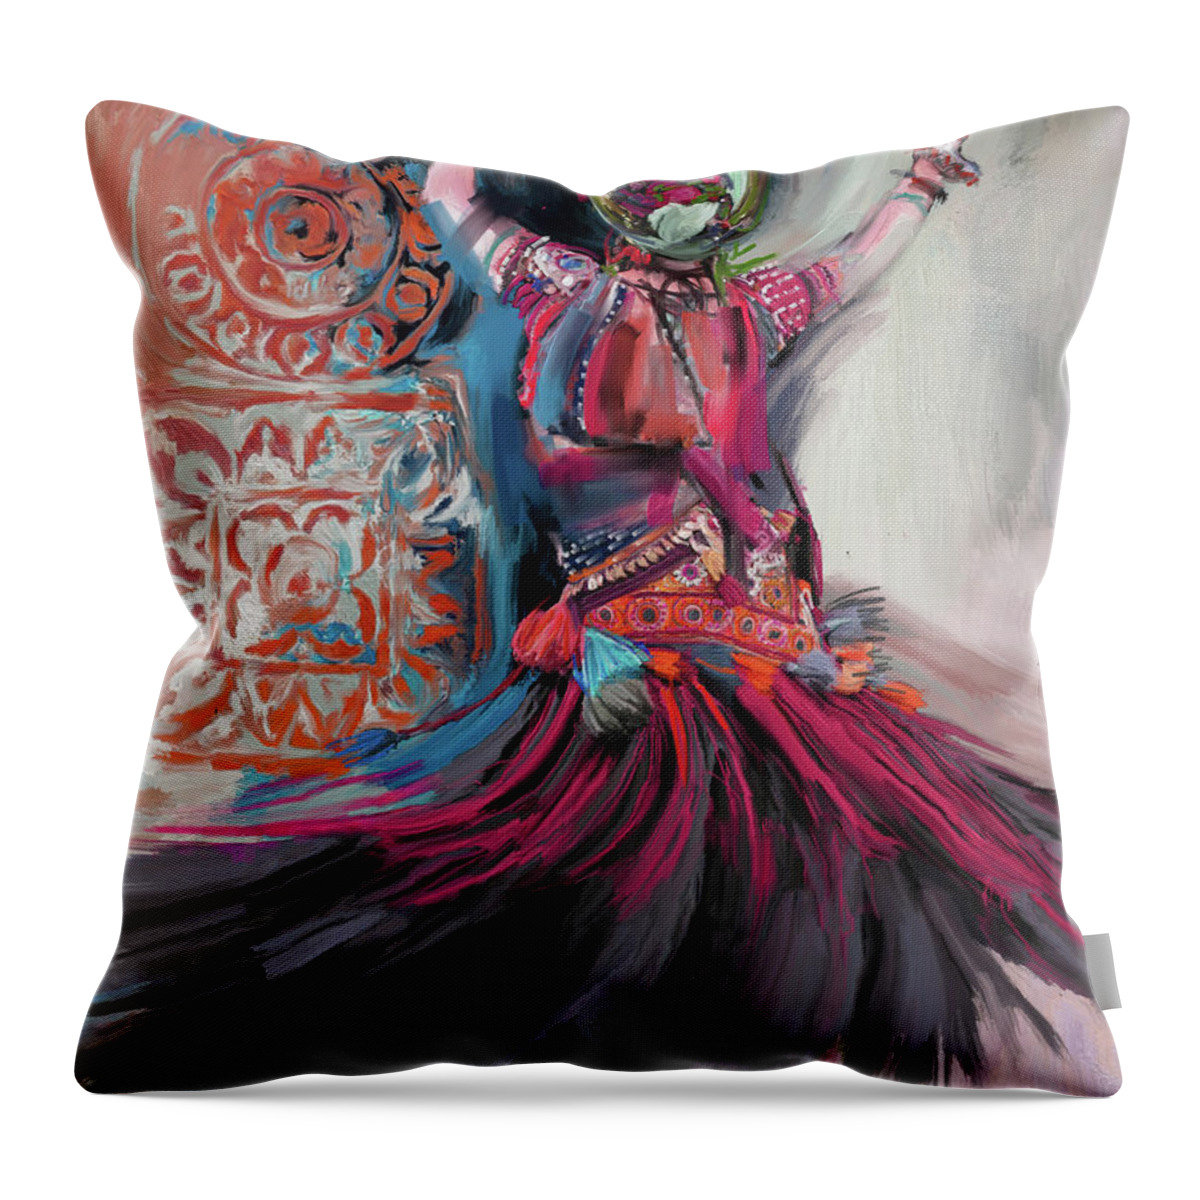 San Francisco Ethnic Dance Festival Throw Pillow featuring the painting Dancers 265 3 by Mawra Tahreem